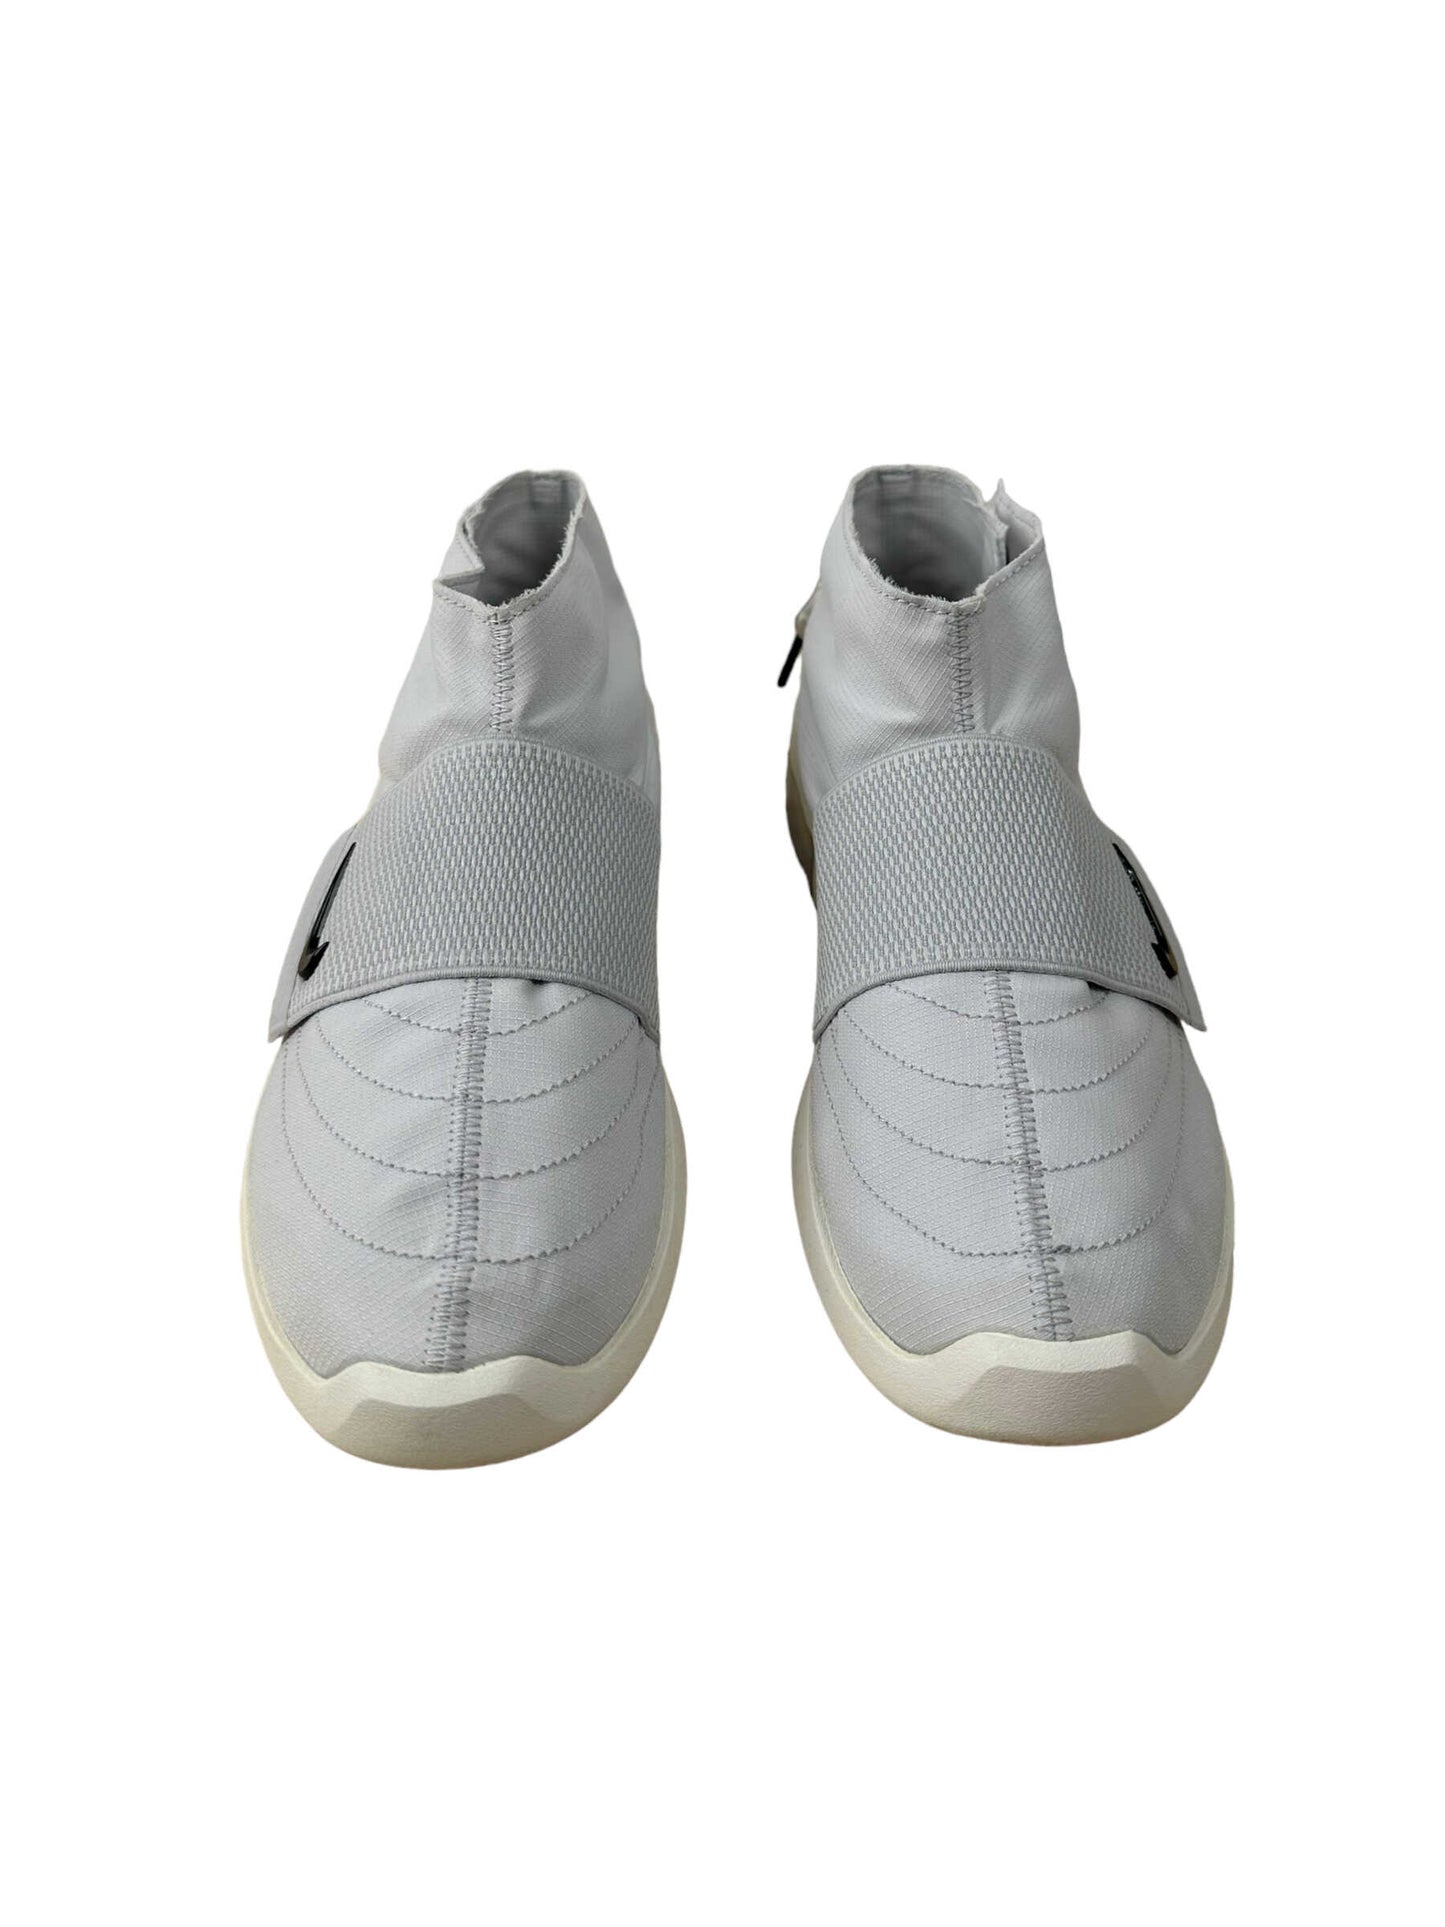 Nike Air Fear Of God Pure Platinum Moccasin Sneakers - Genuine Design Luxury Consignment for Men. New & Pre-Owned Clothing, Shoes, & Accessories. Calgary, Canada